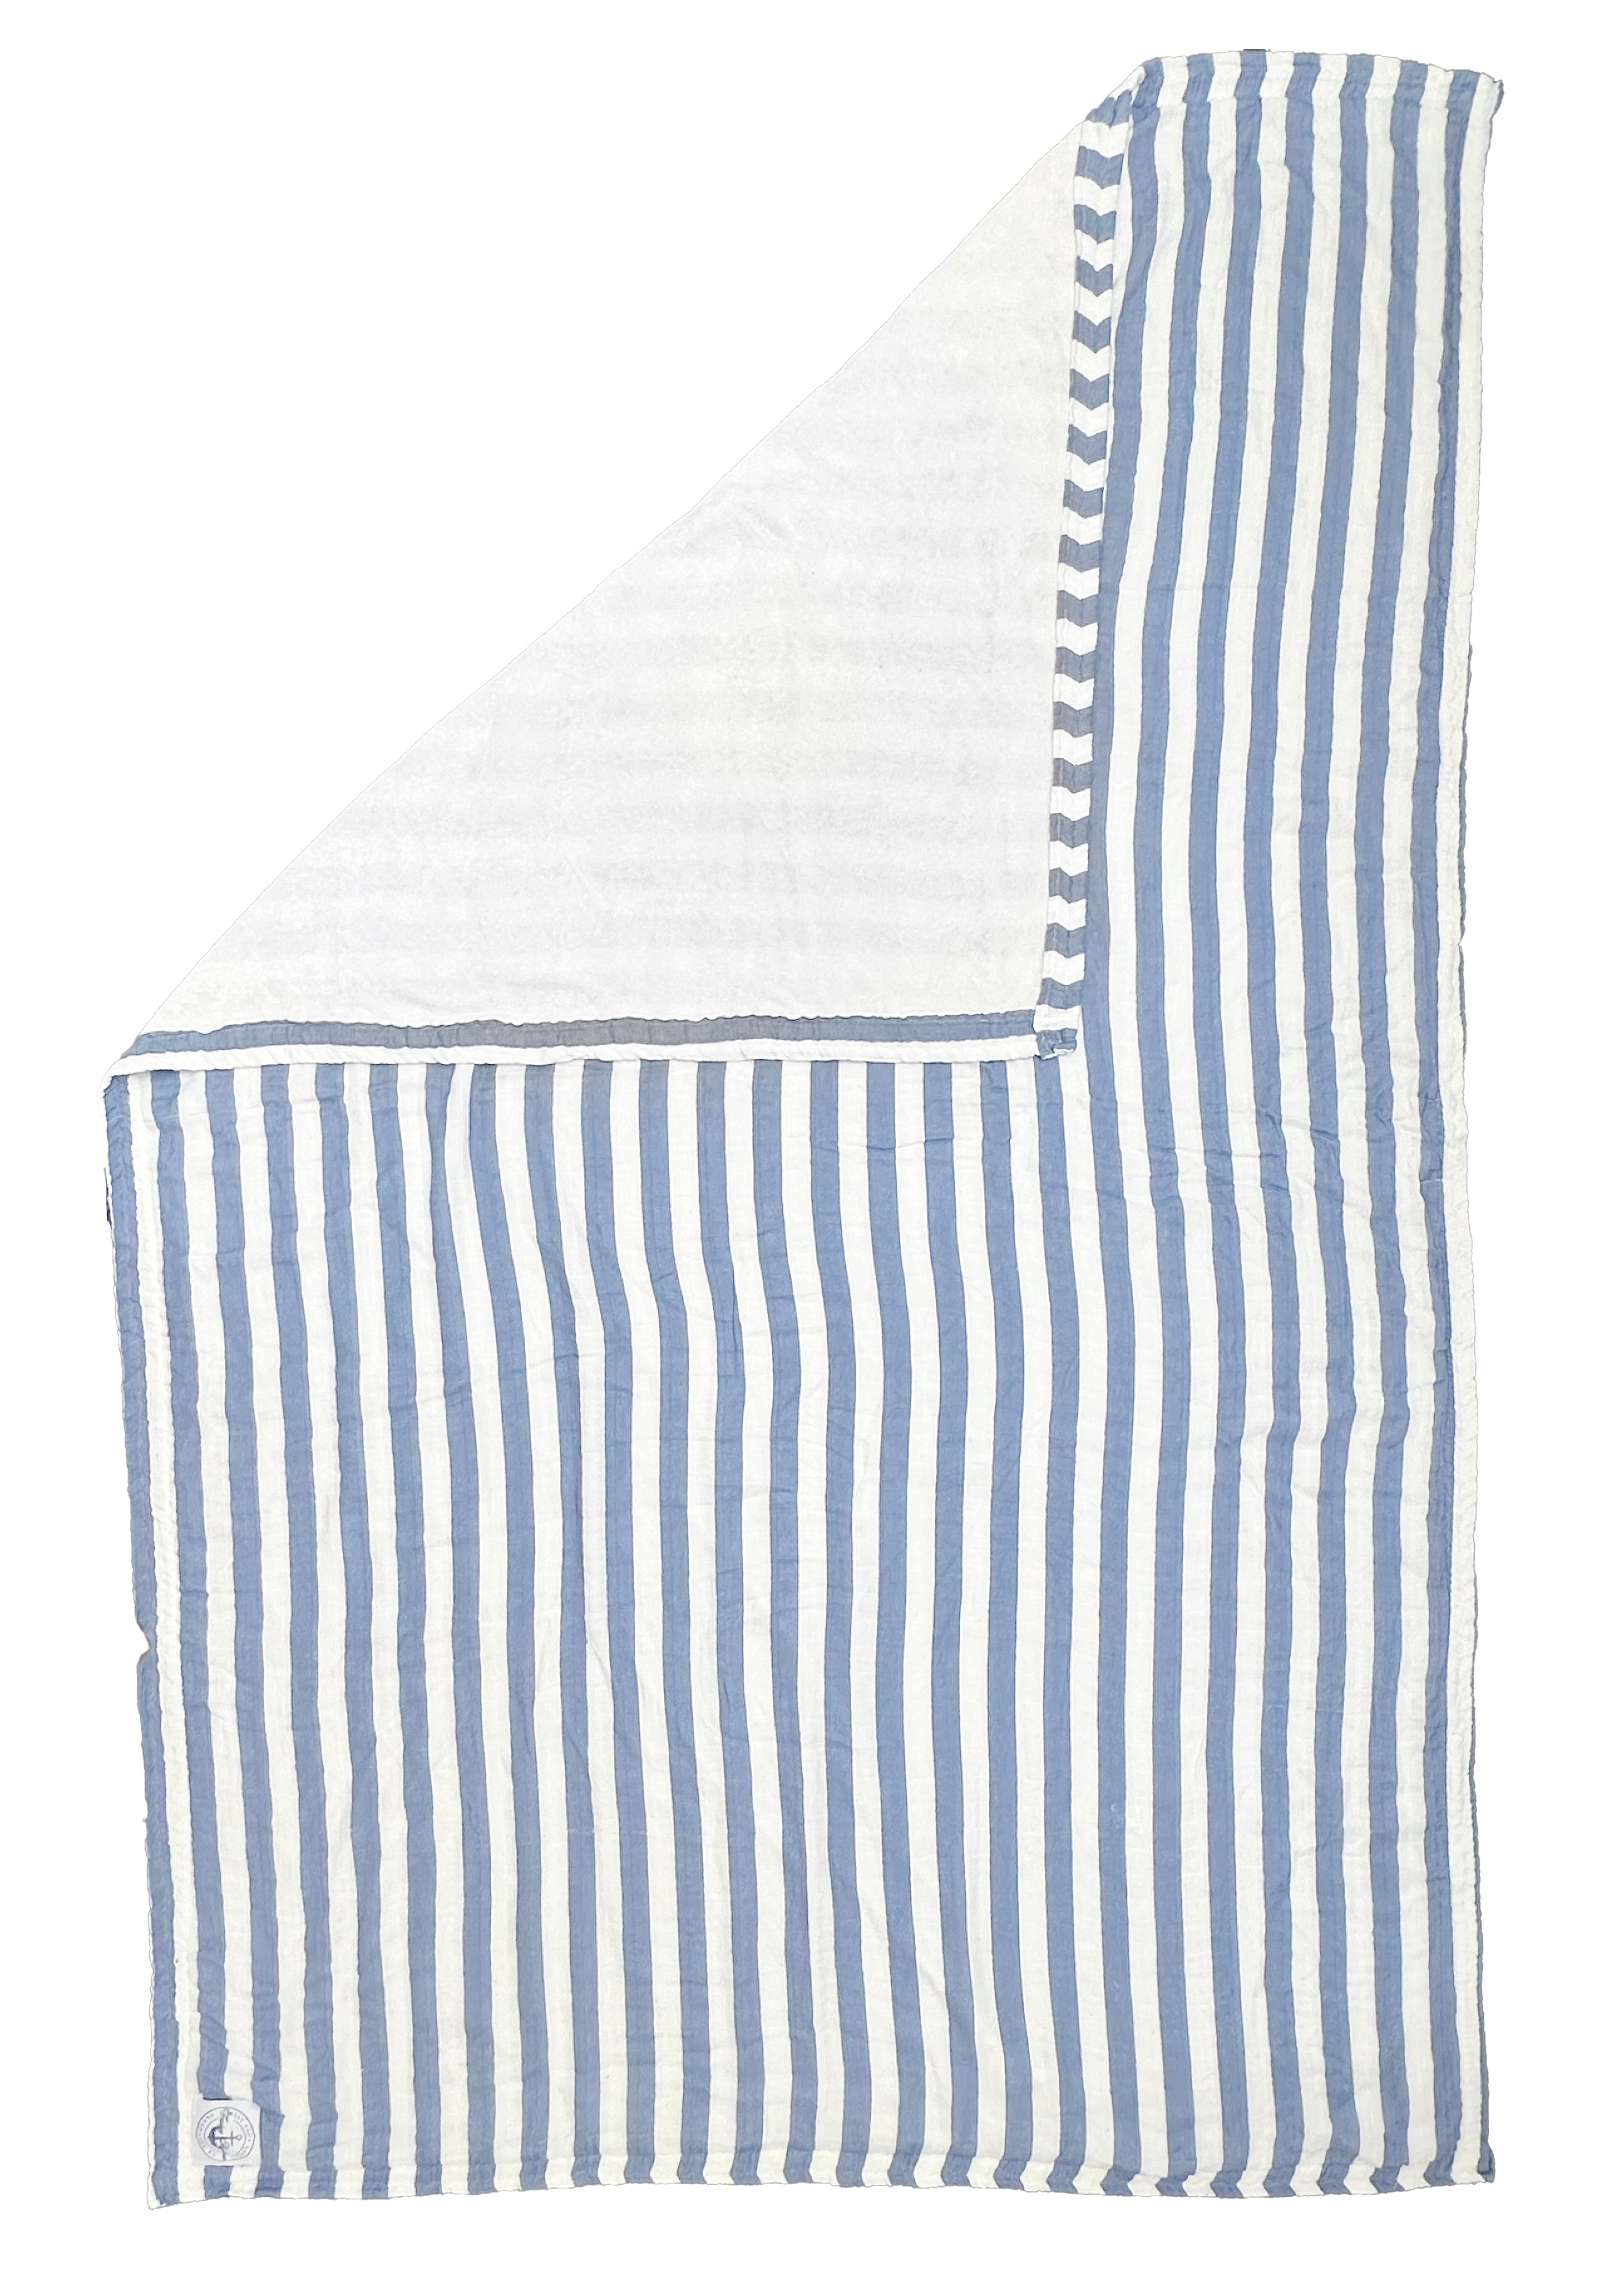 The Cloud Towel™ - Blue & White Stripe - Friday Harbour Lifestyle Company 